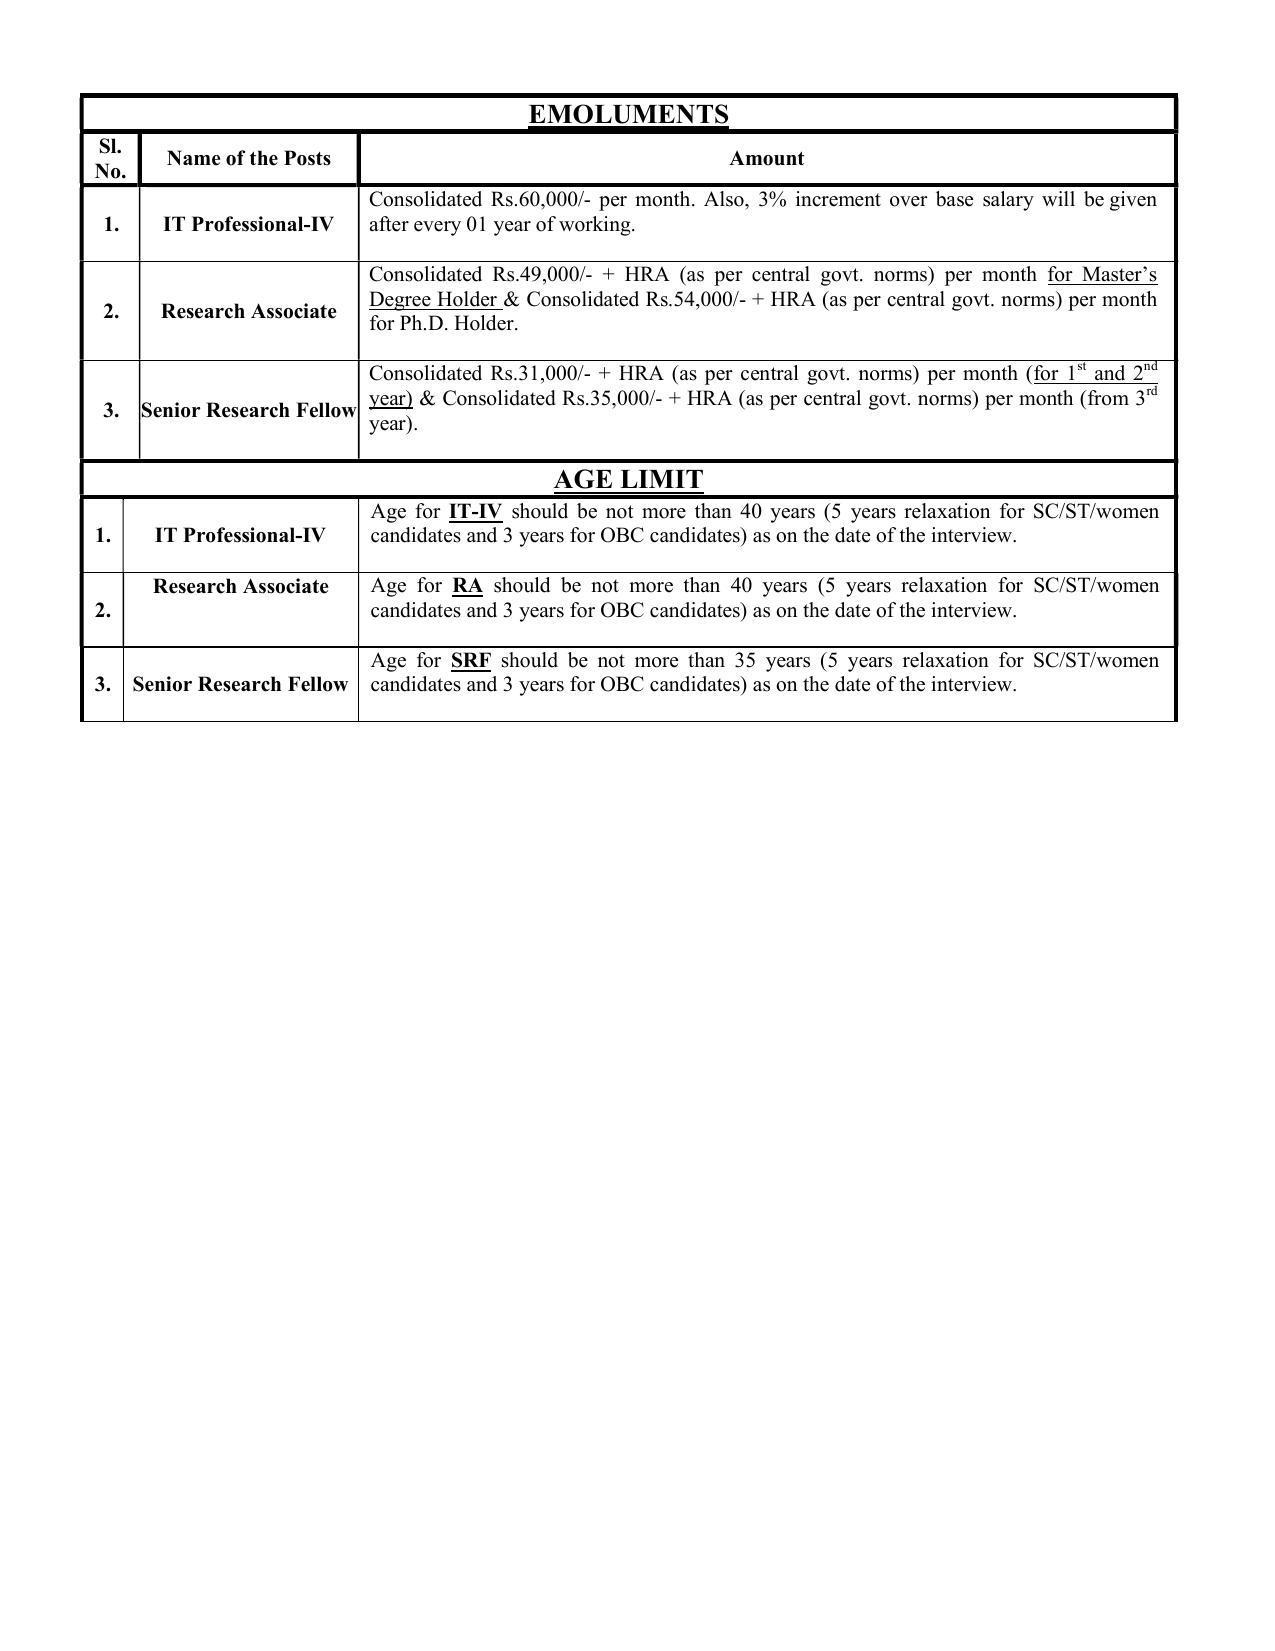 IASRI Invites Application for IT Professional-IV, Research Associate, More Vacancies Recruitment 2022 - Page 12